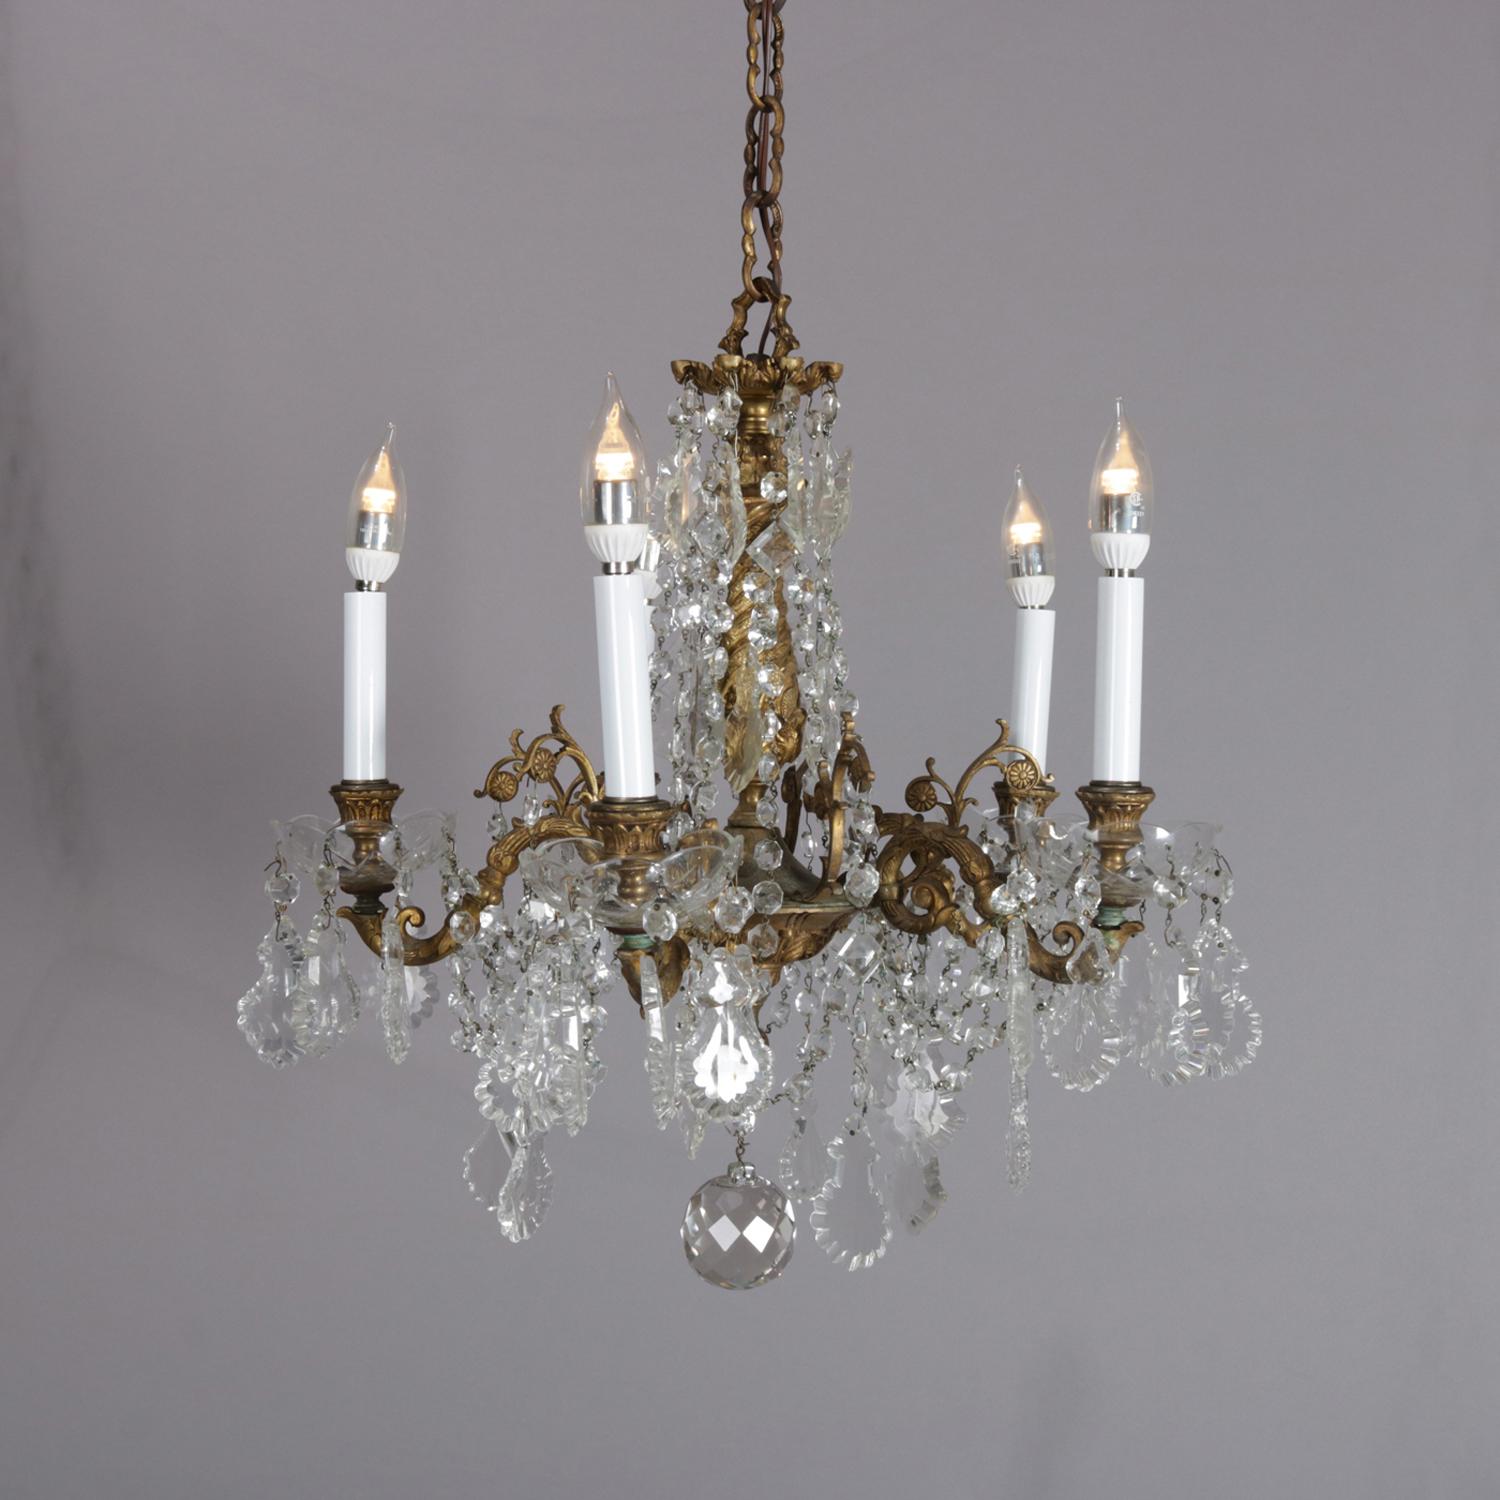 Cast Antique French Gilt Bronze Foliate and Cut Crystal Five-Light Chandelier